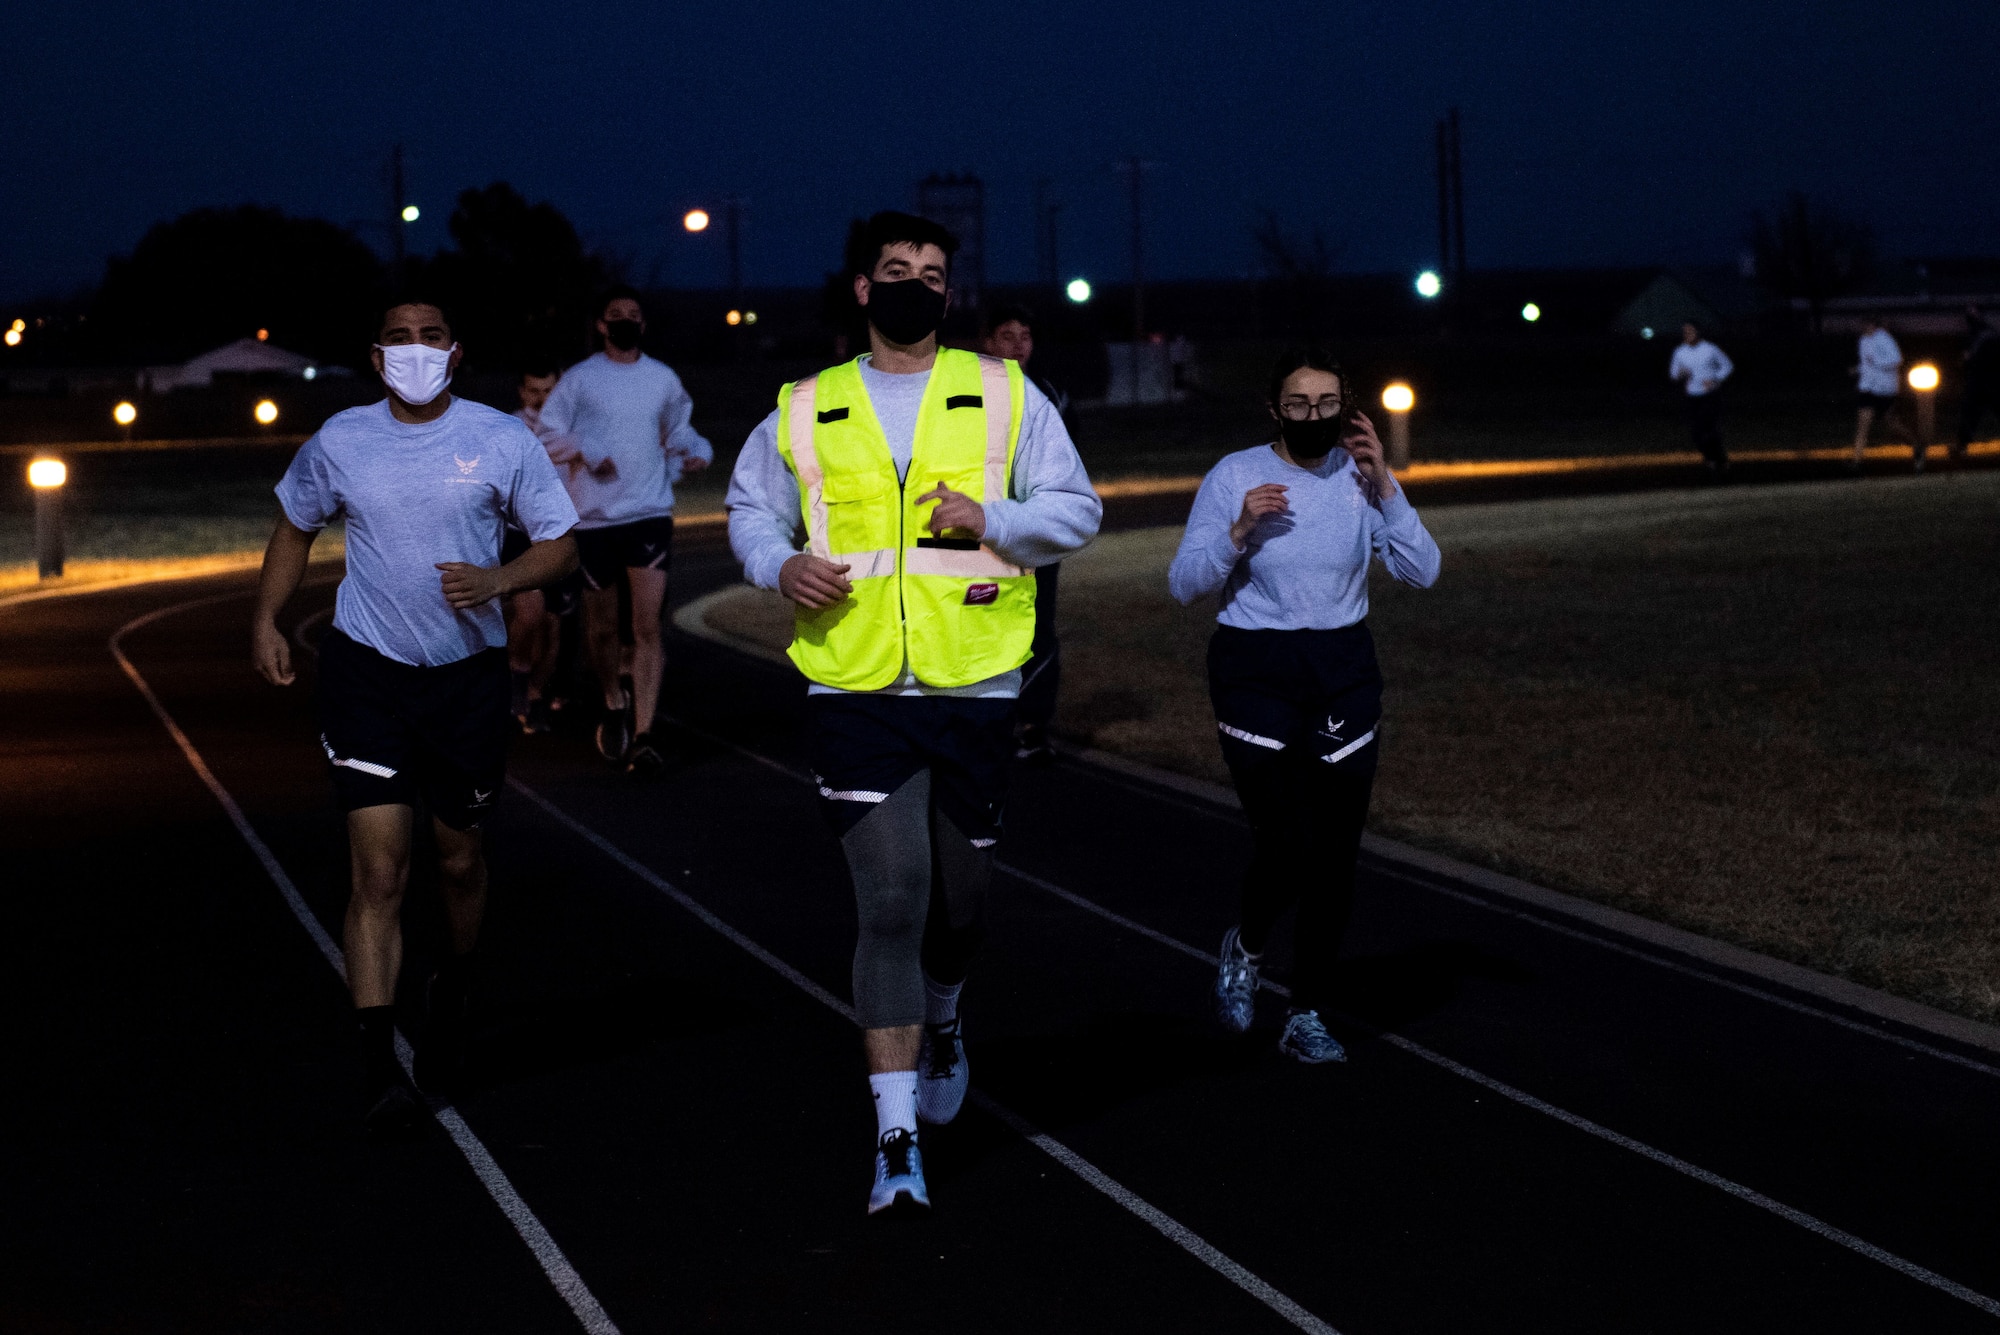 Student pilots starting off their morning PT with a mile and a half run on Feb. 01, 2021 at Laughlin Air Force Base, Texas. The students performed a three-mile run to adhere to Air Force standards. (U.S. Air Force photo by Airman 1st Class David Phaff)